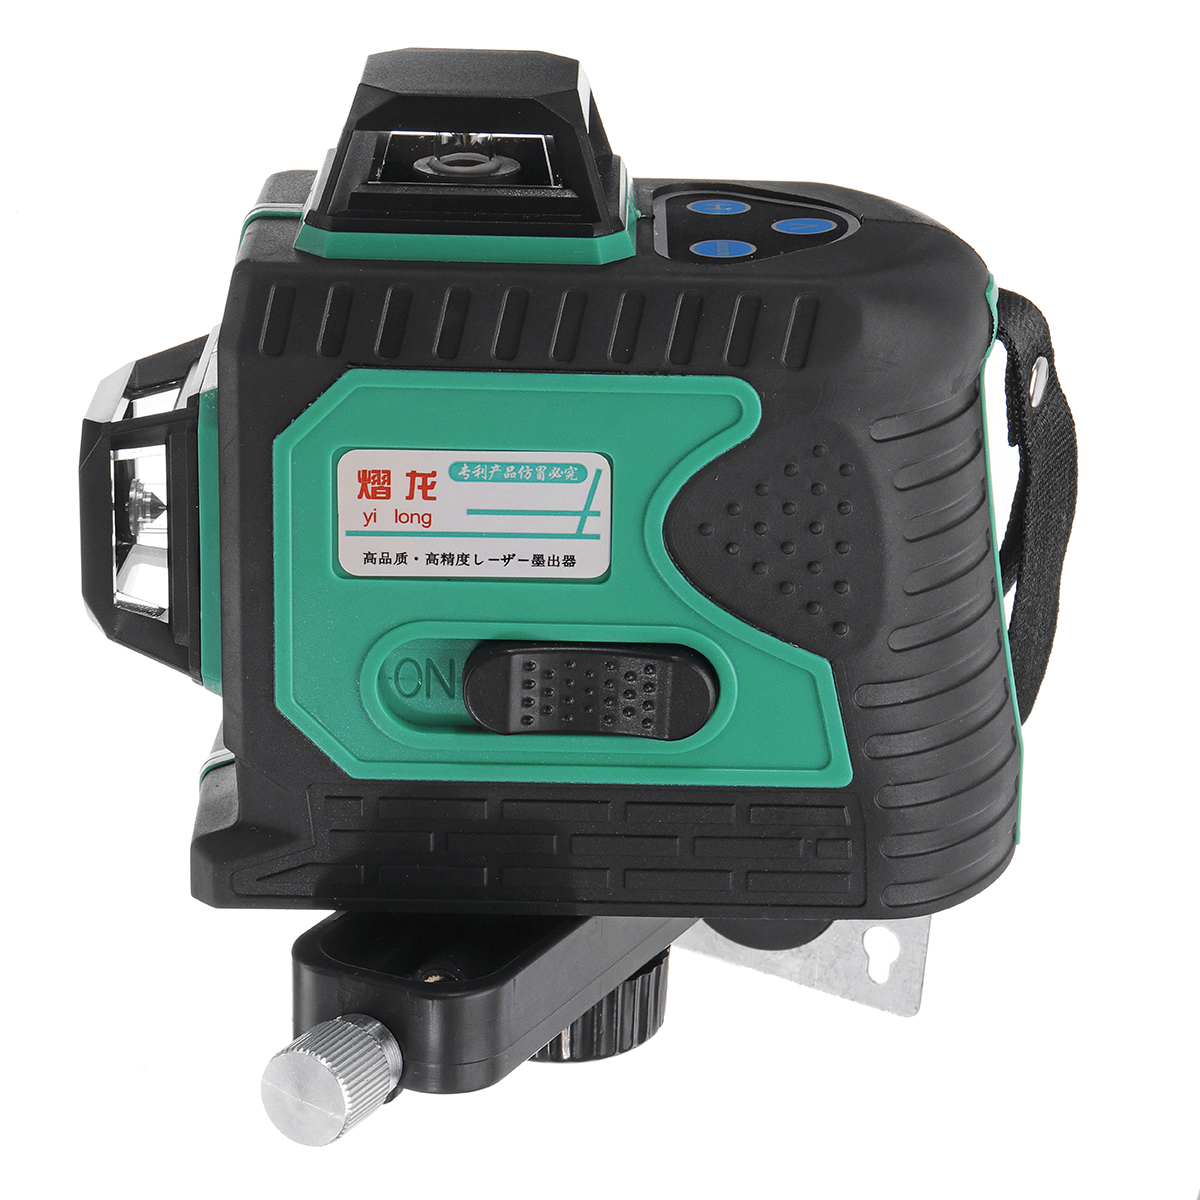 Blue-green-Light-12-line-Outdoor-Strong-Laser-Level-Infrared-Light-High-precision-Automatic-1445383-3